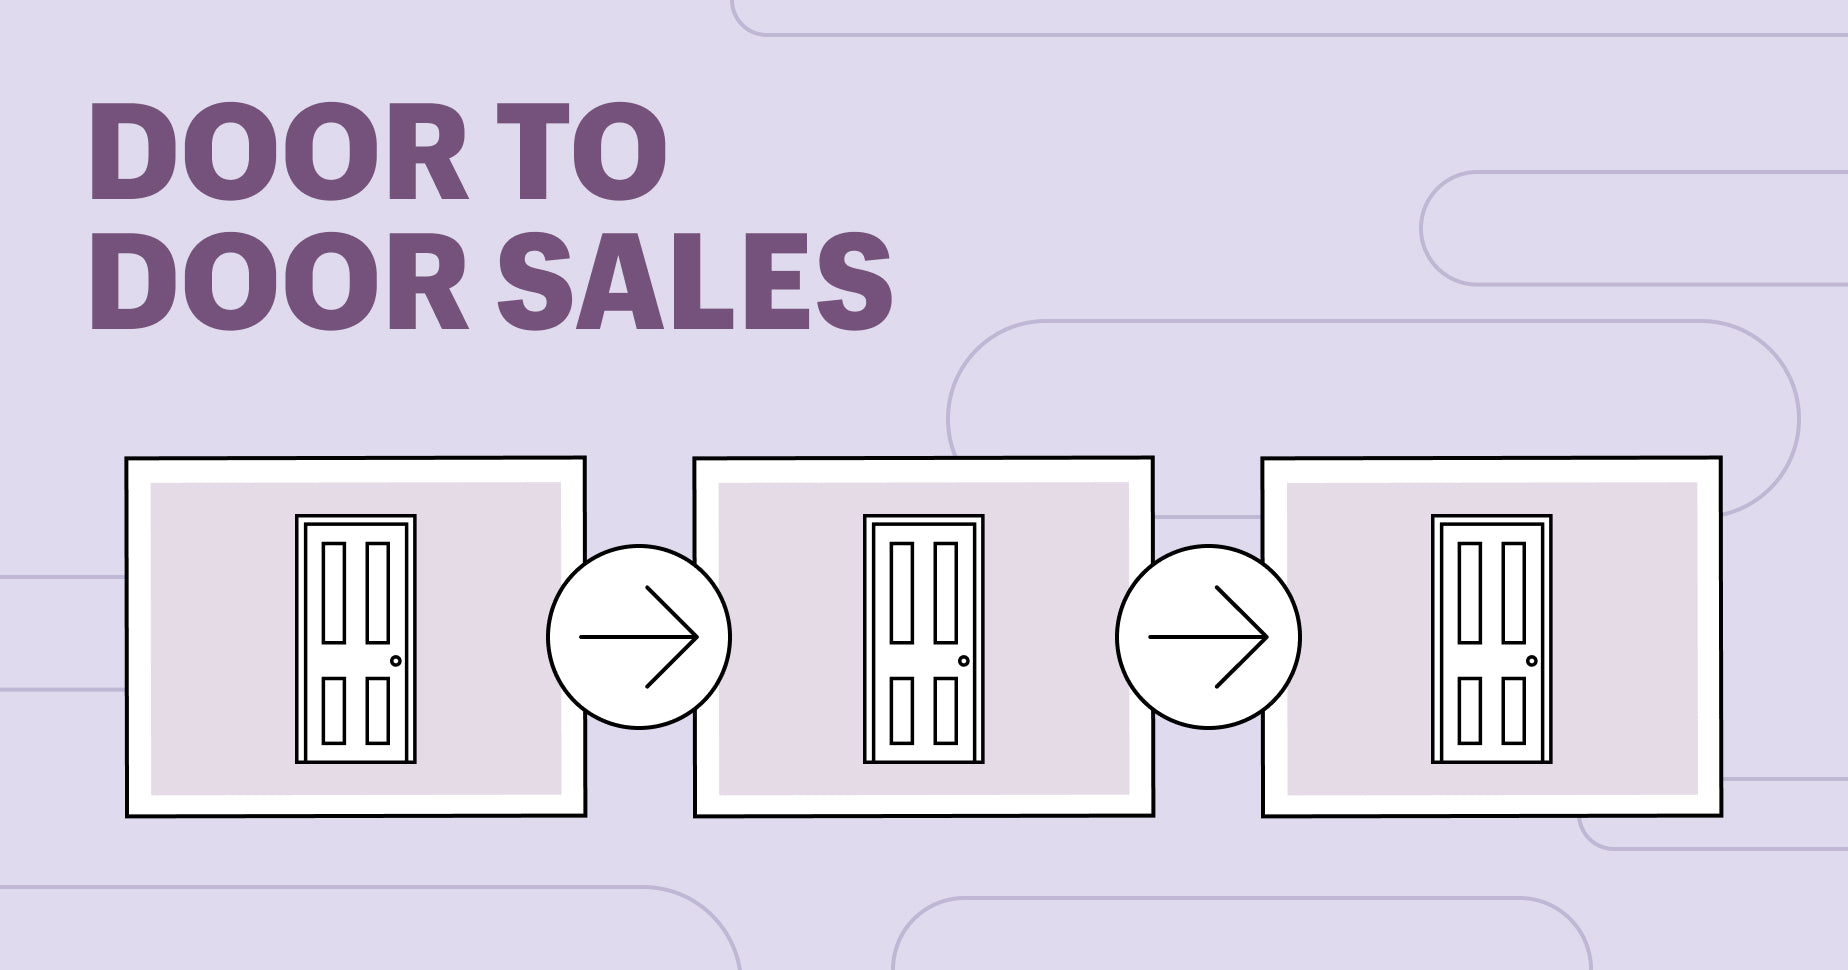 Graphic that says "door to door sales" on the top left. Underneath from left to right is three doors in a box with directional arrows pointing to the right.